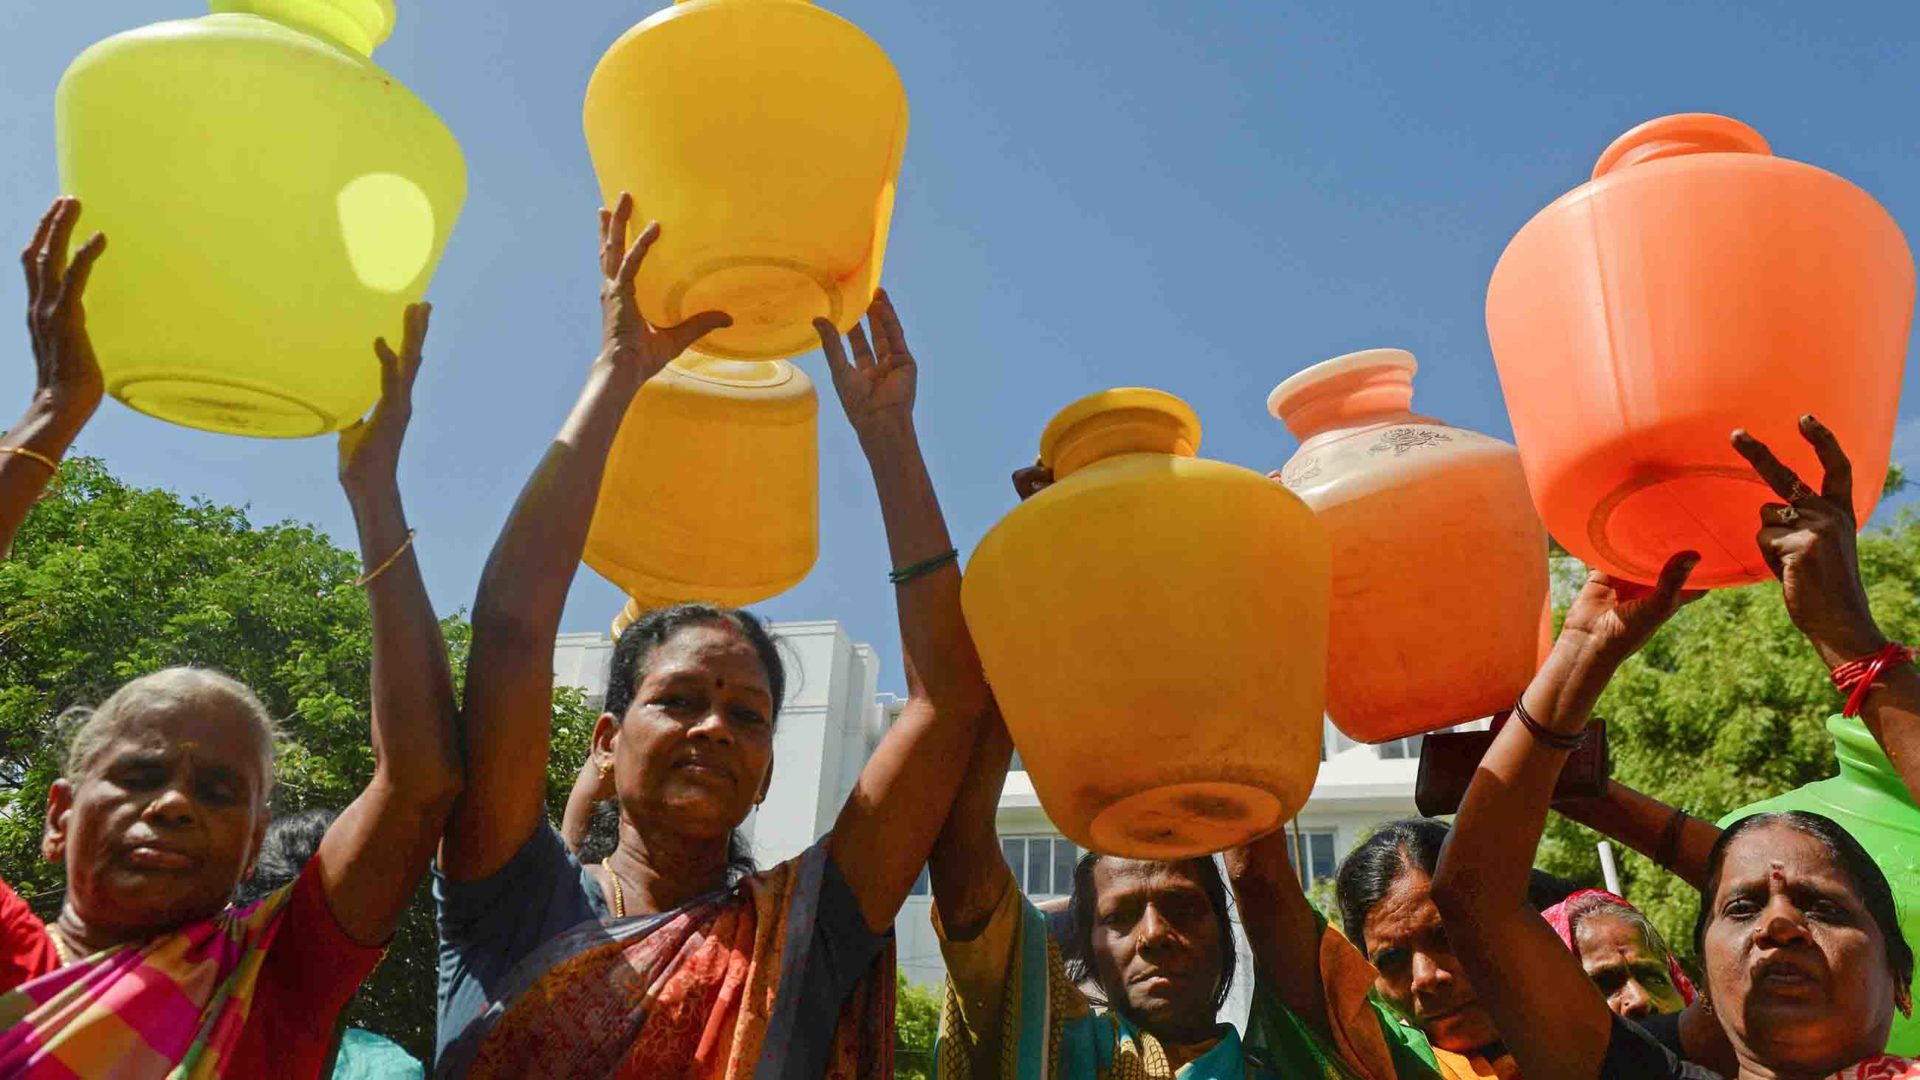 Indian women with empty plastic pots protest as they demand drinking water in Chennai on June 22, 2019.